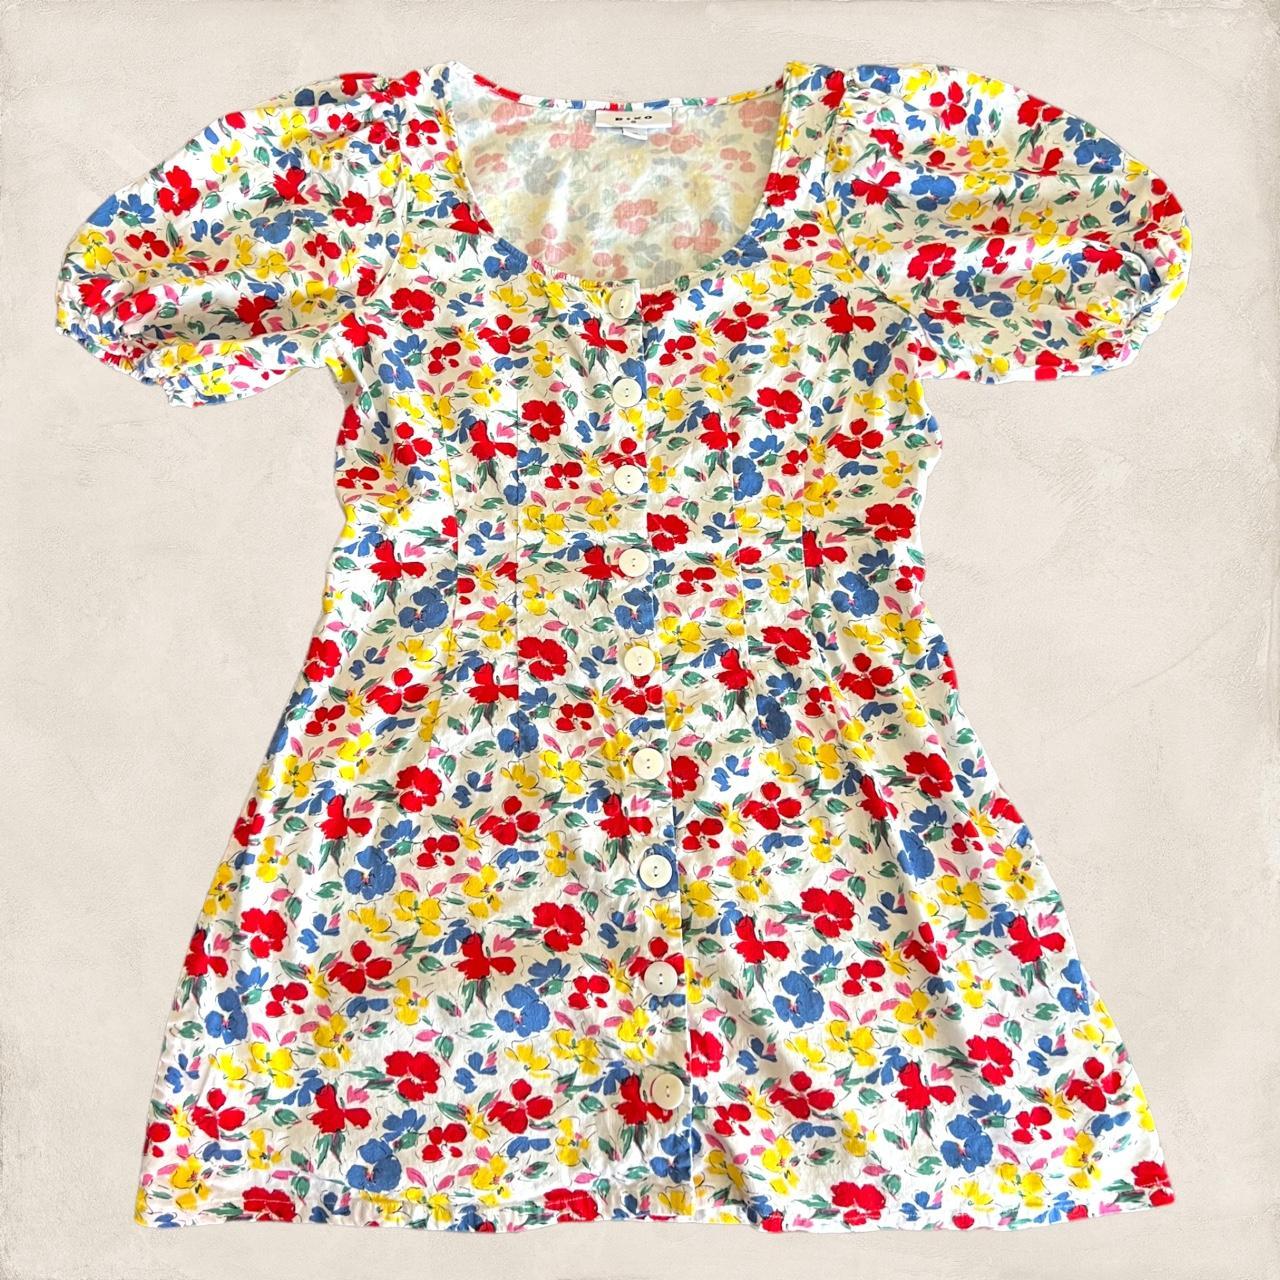 Product Image 2 - Rixo Floral Dress

Such a cute